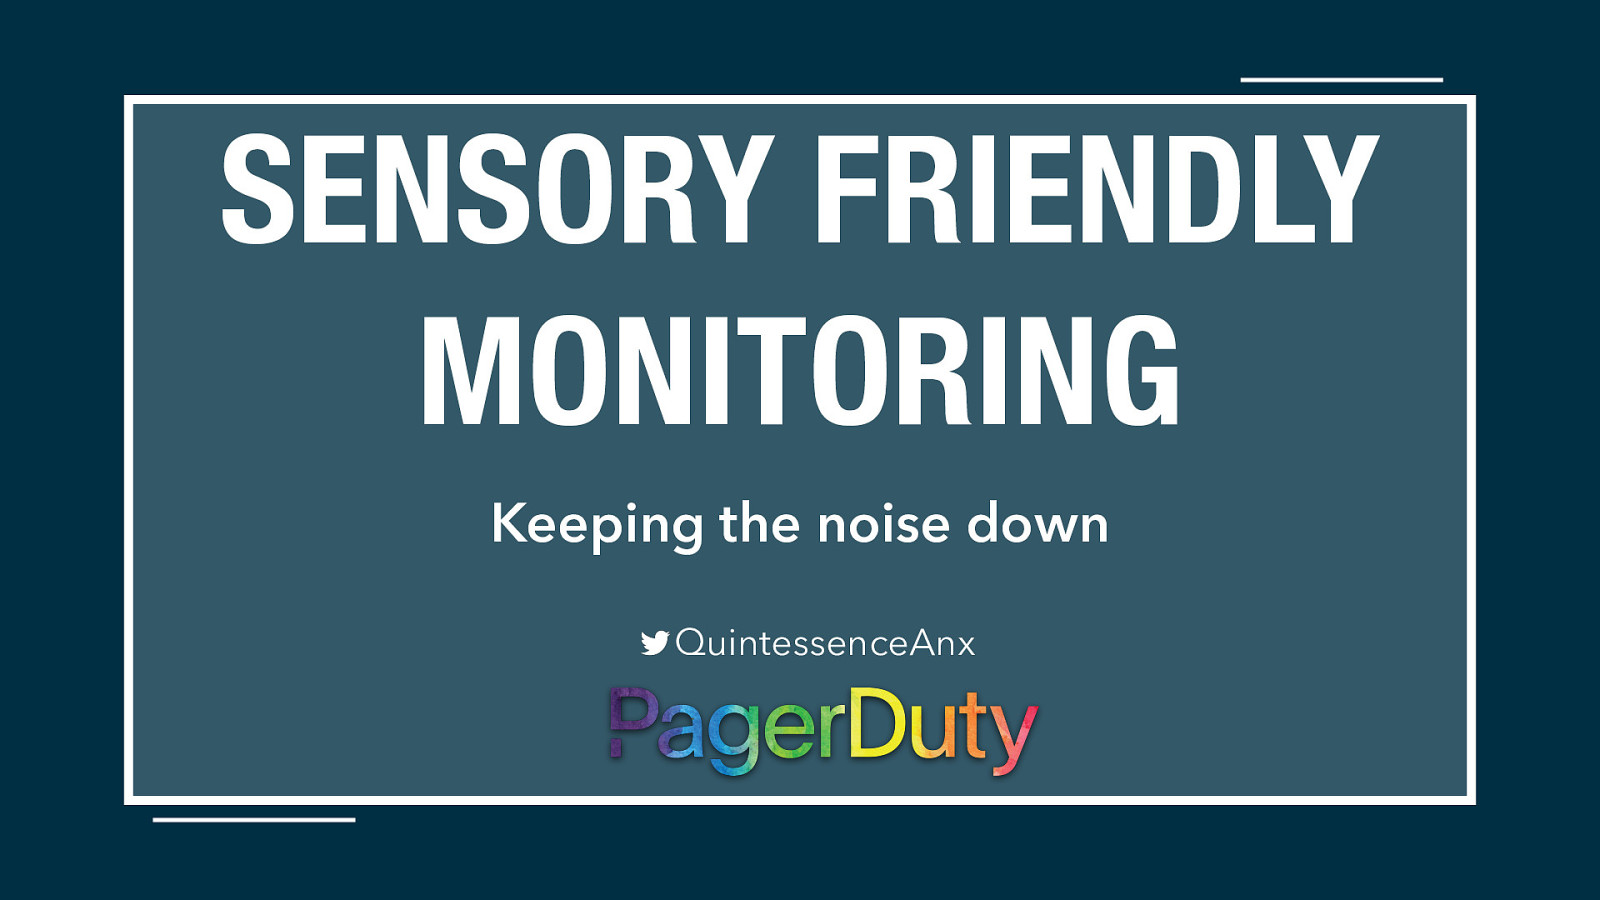 Sensory Friendly Monitoring: Keeping the Noise Down